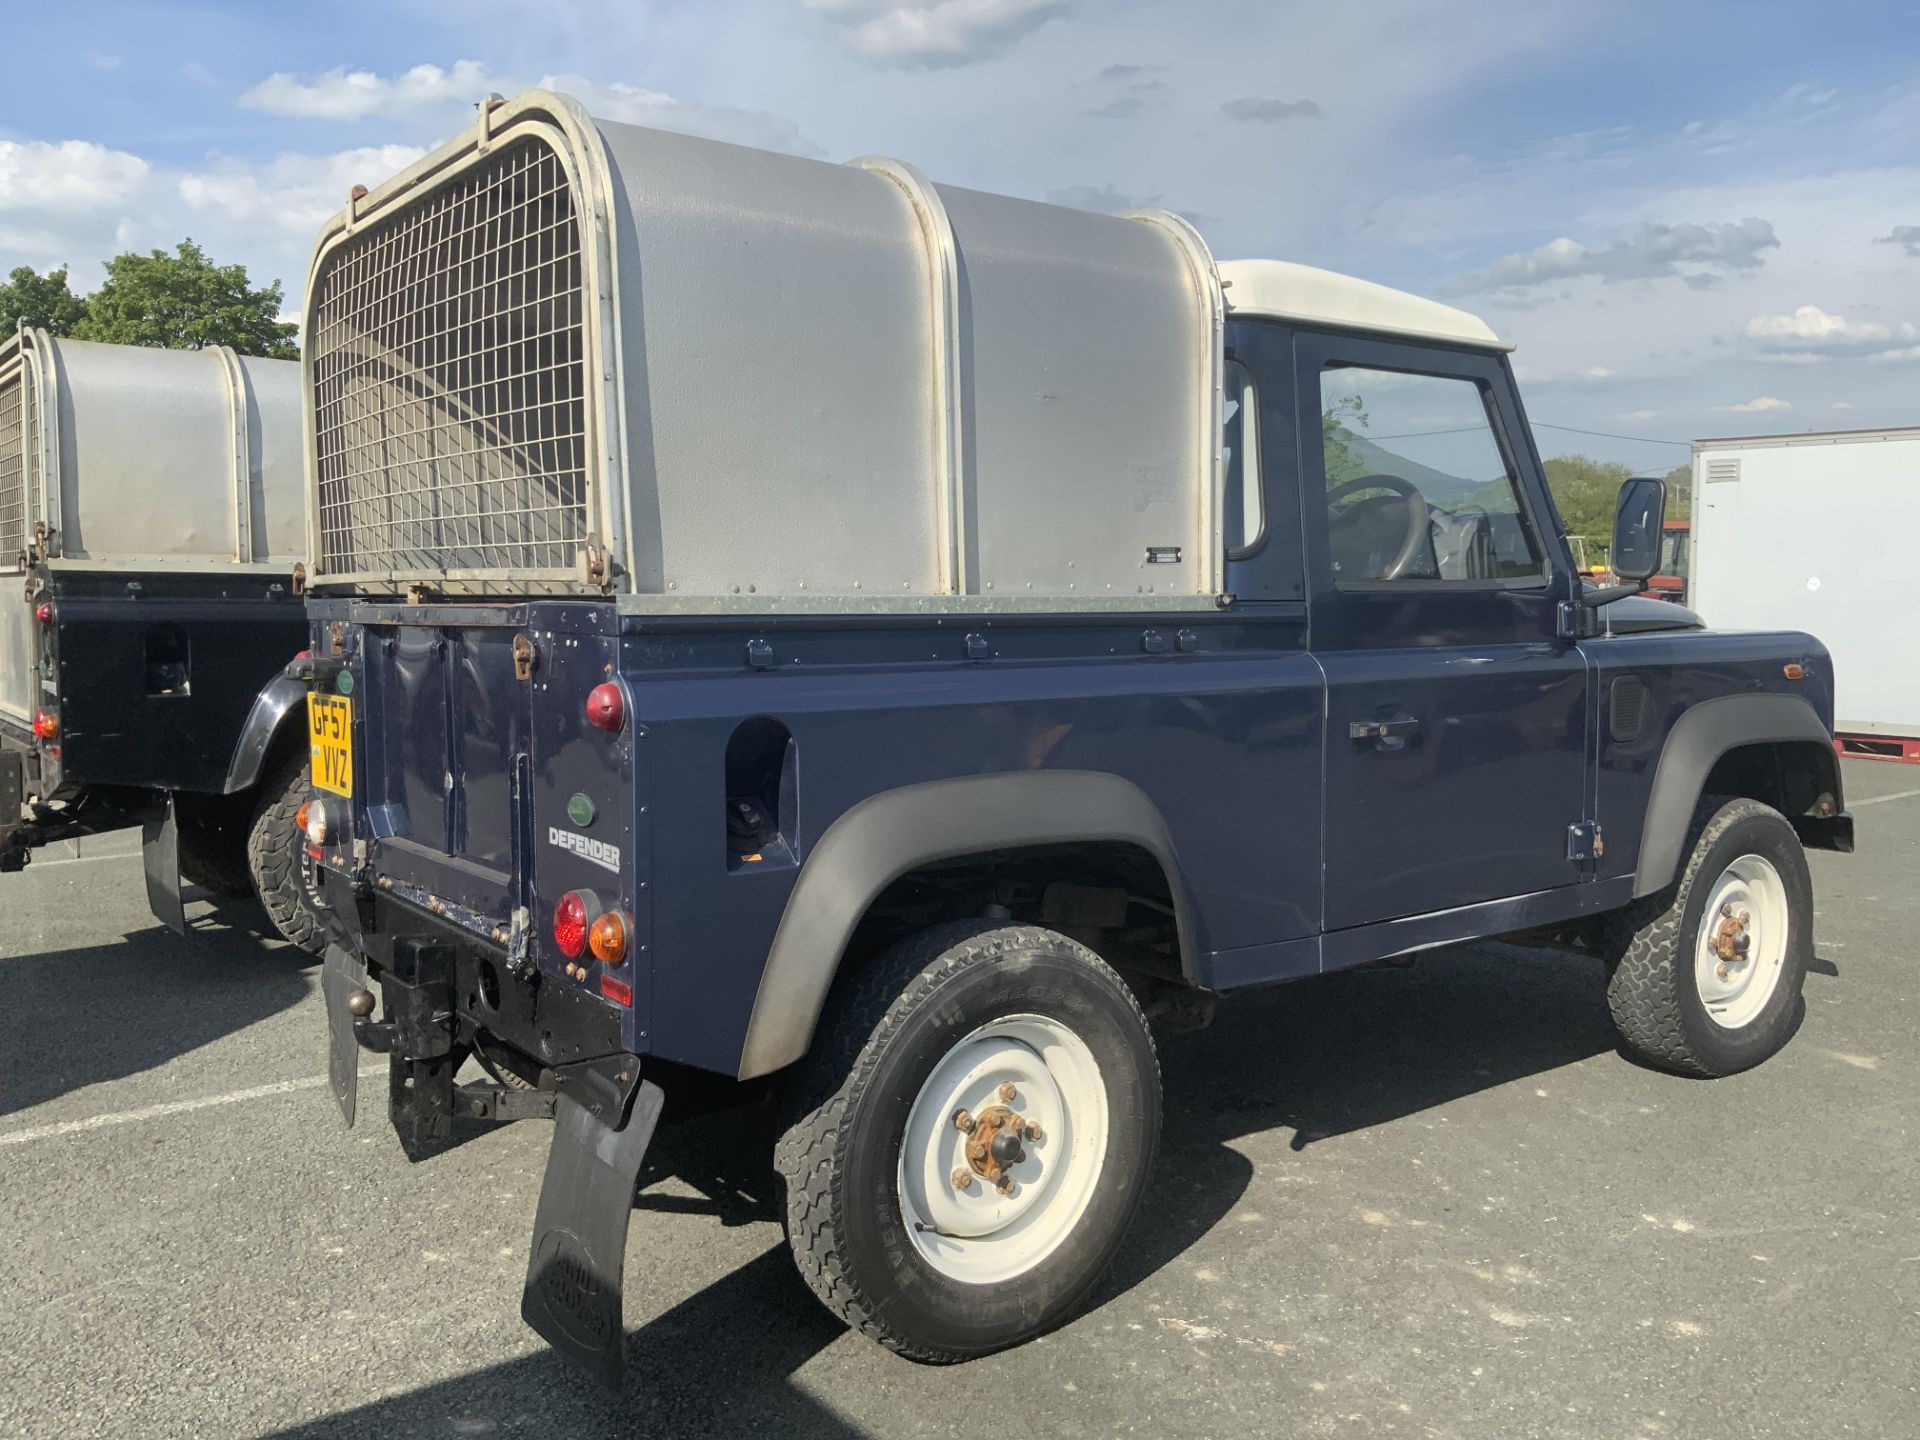 LANDROVER DEFENDER 90. TRUCKCAB - Image 5 of 6